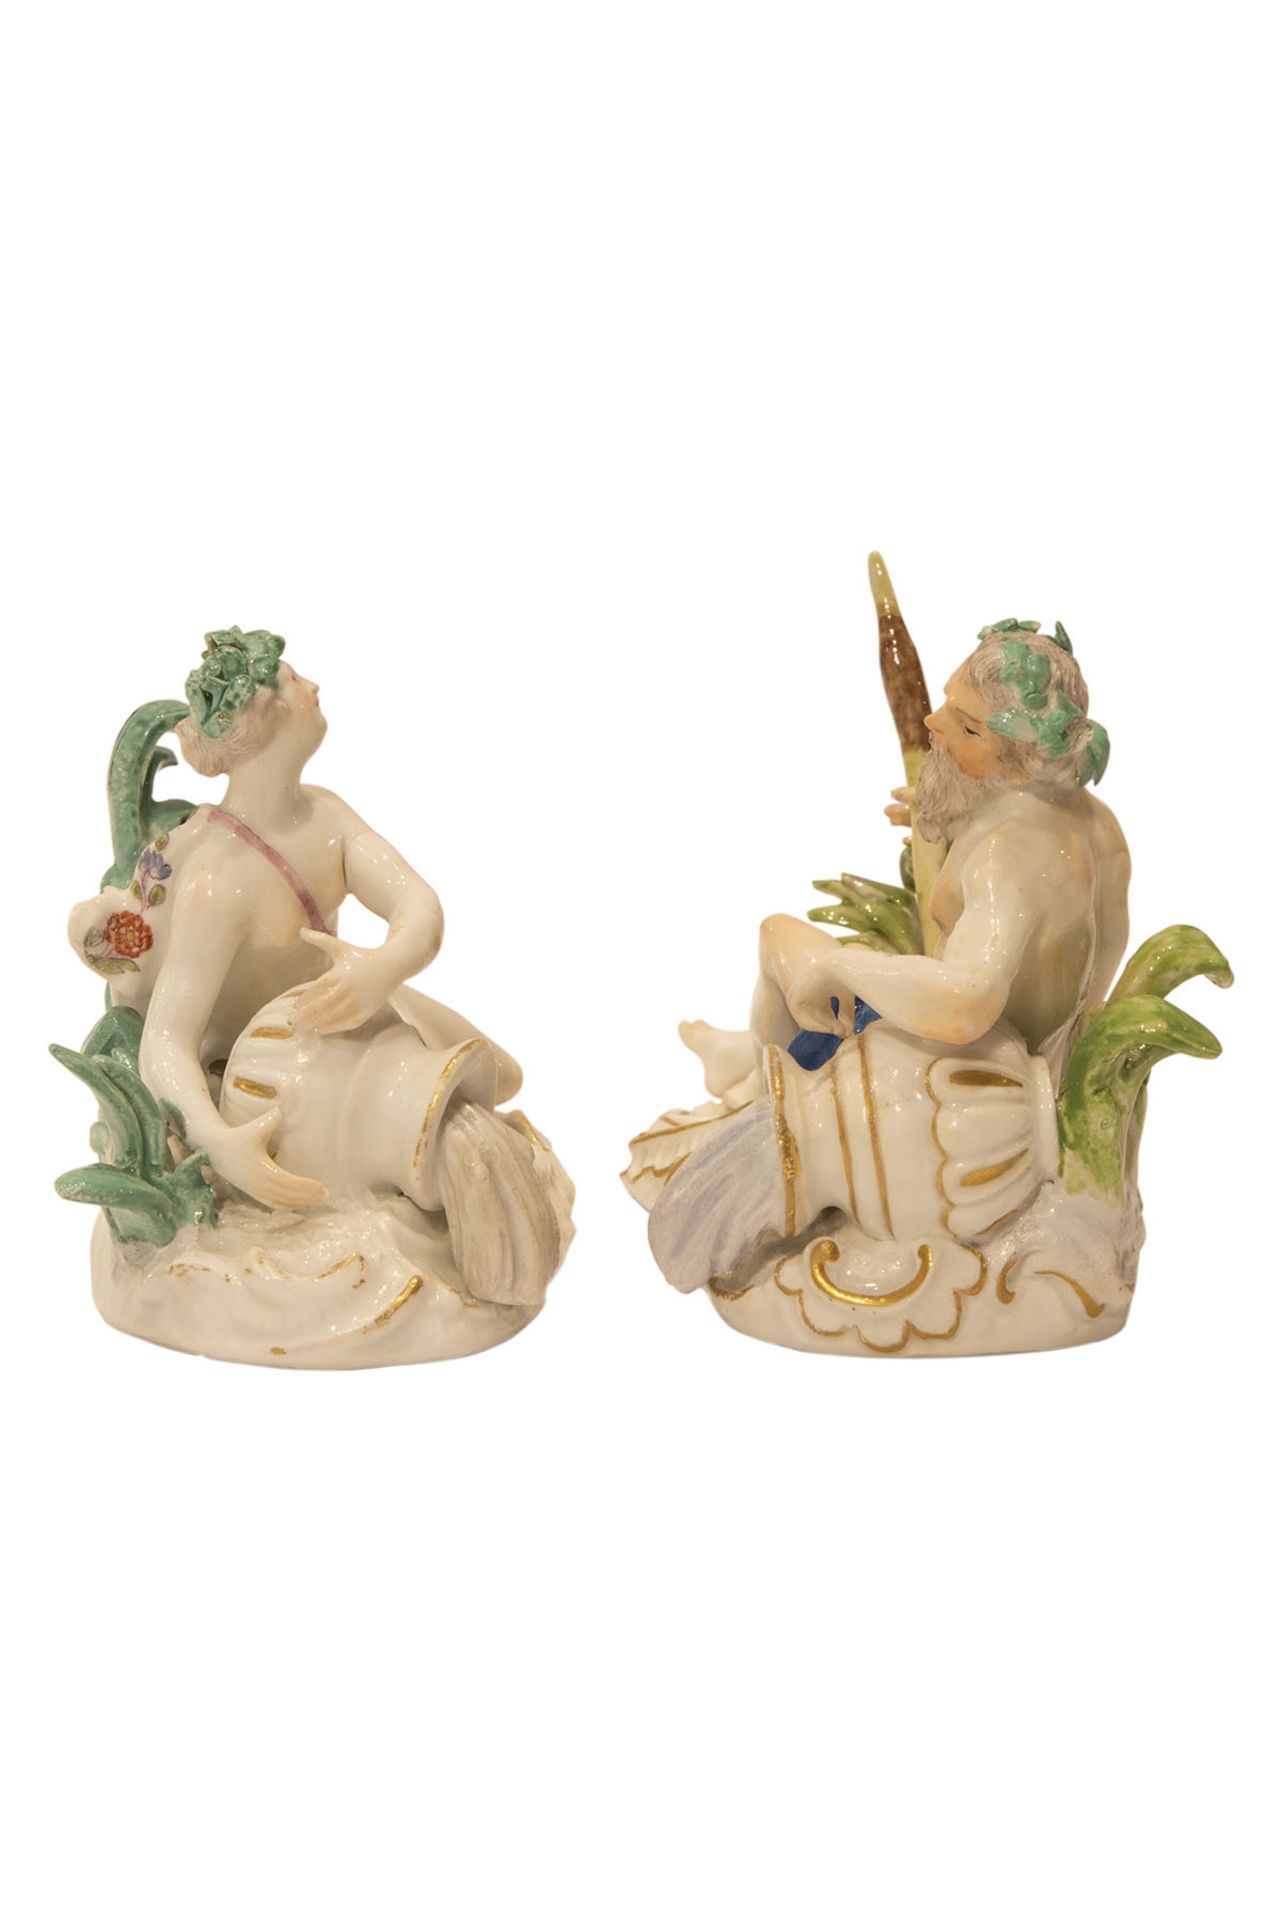 Two small figures river god and river goddess, Meissen 1750 - Image 2 of 6